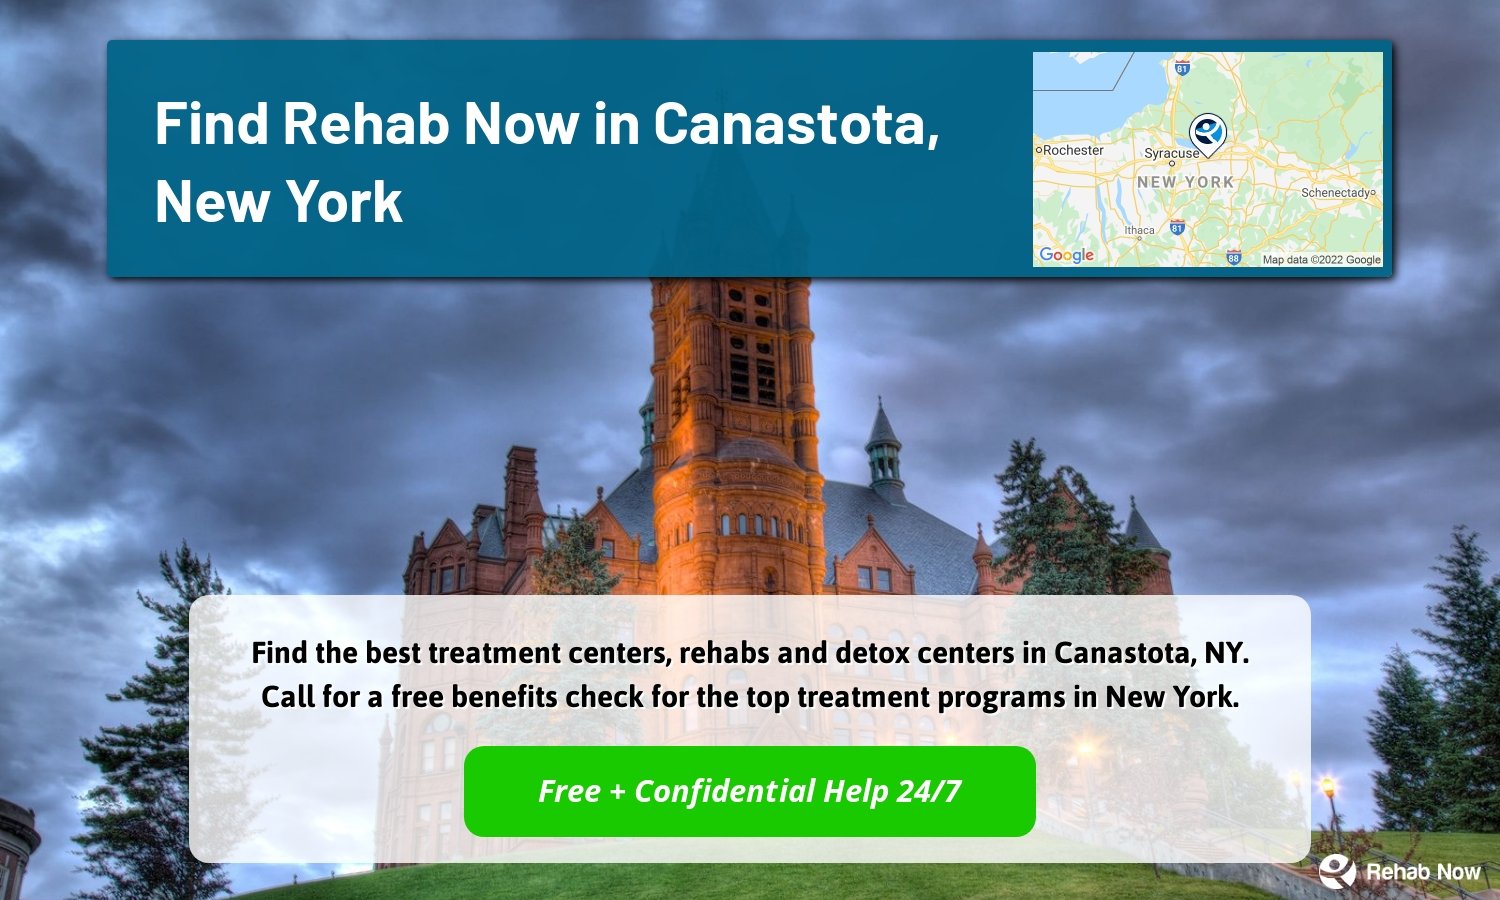 Find the best treatment centers, rehabs and detox centers in Canastota, NY. Call for a free benefits check for the top treatment programs in New York.